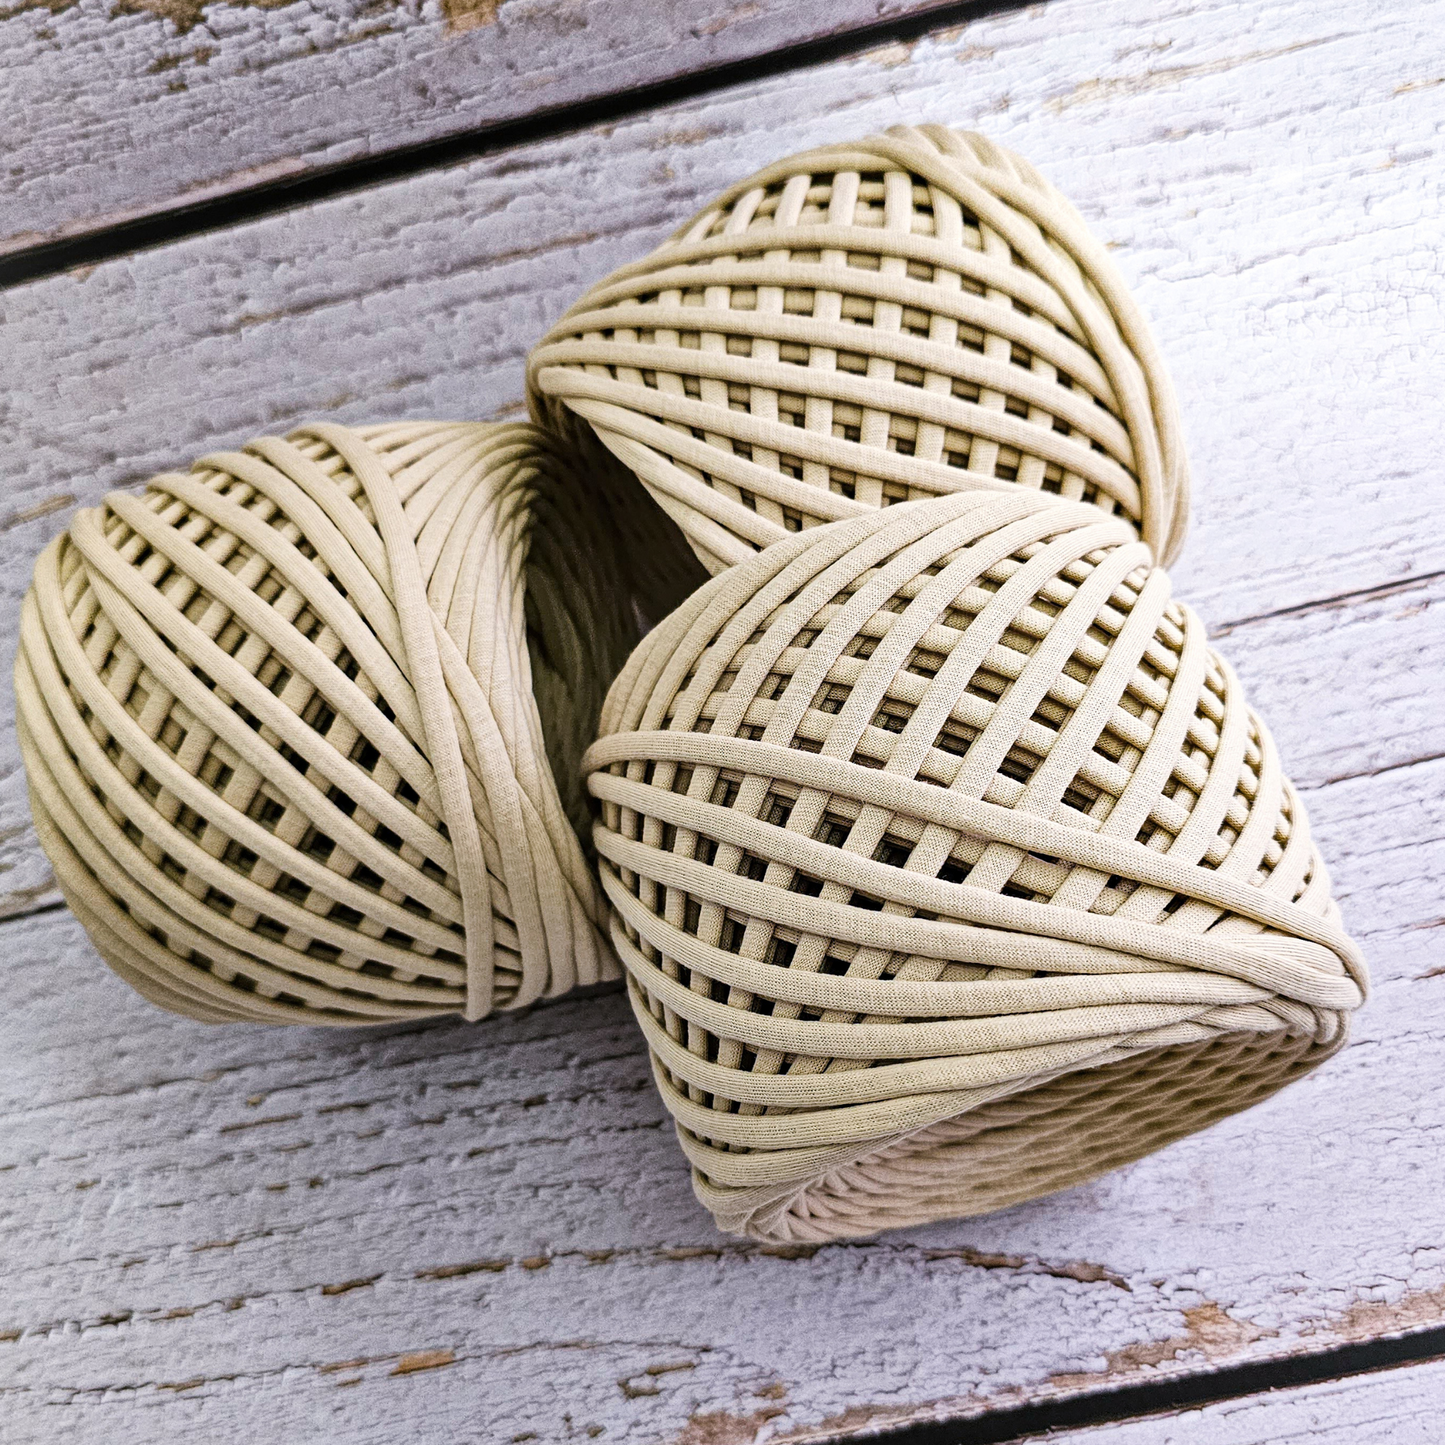 T-shirt yarn for crocheting baskets, bags, rugs and home decor. Latte